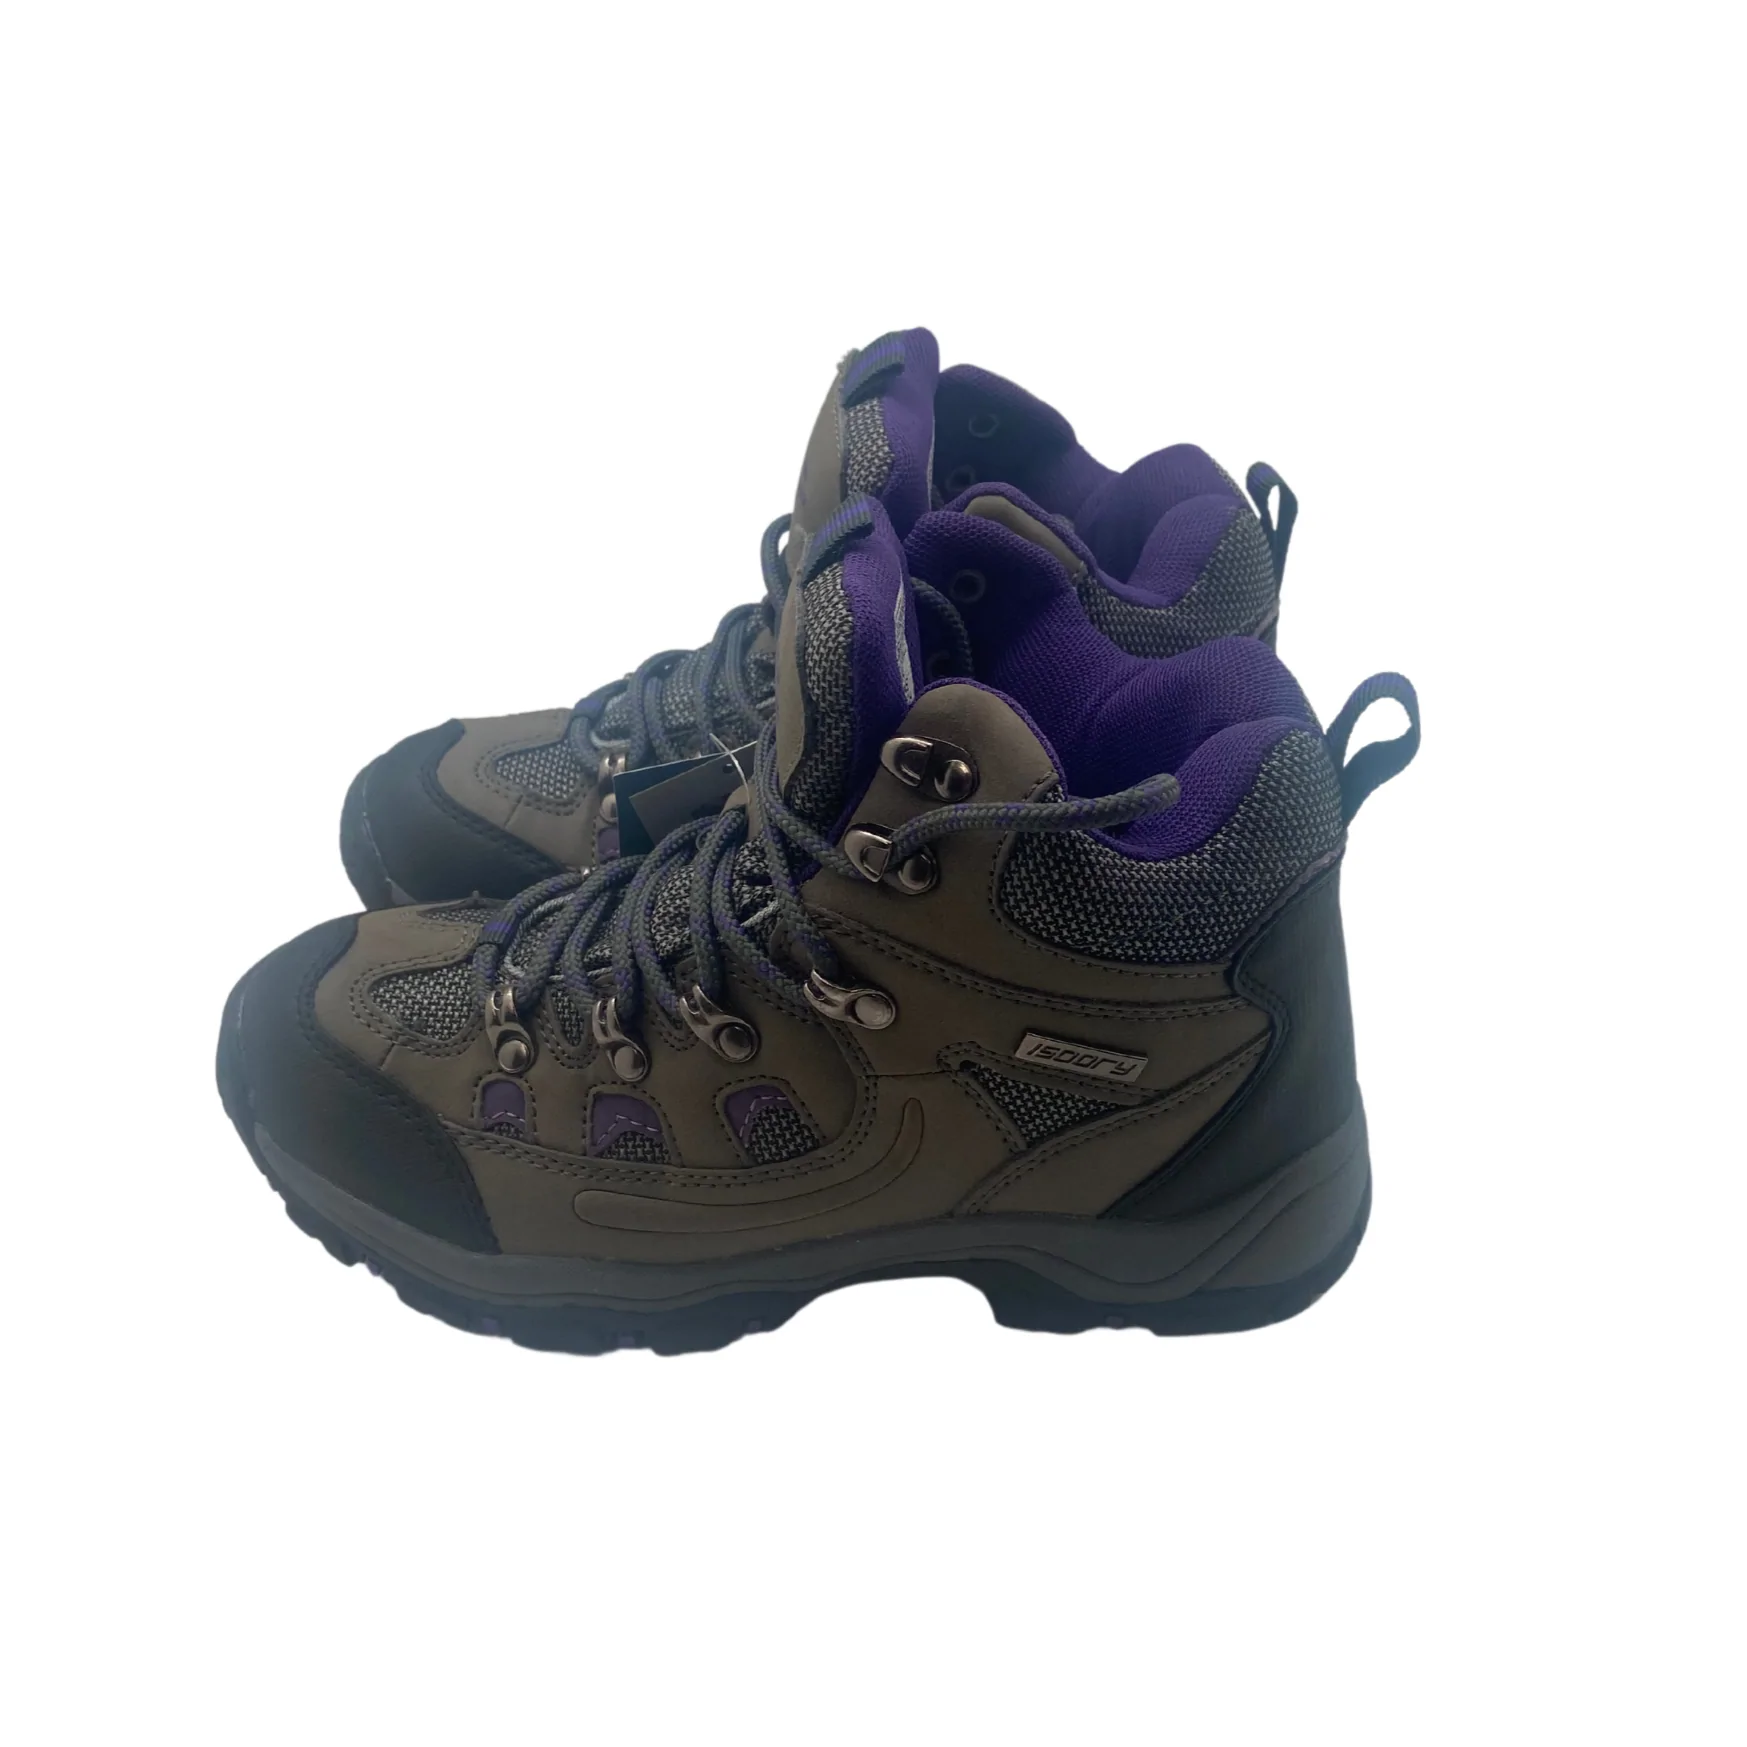 Mountain Warehouse: Women's Hiking Boots / Grey / Purple / Water Proof / Lace up / Size 6